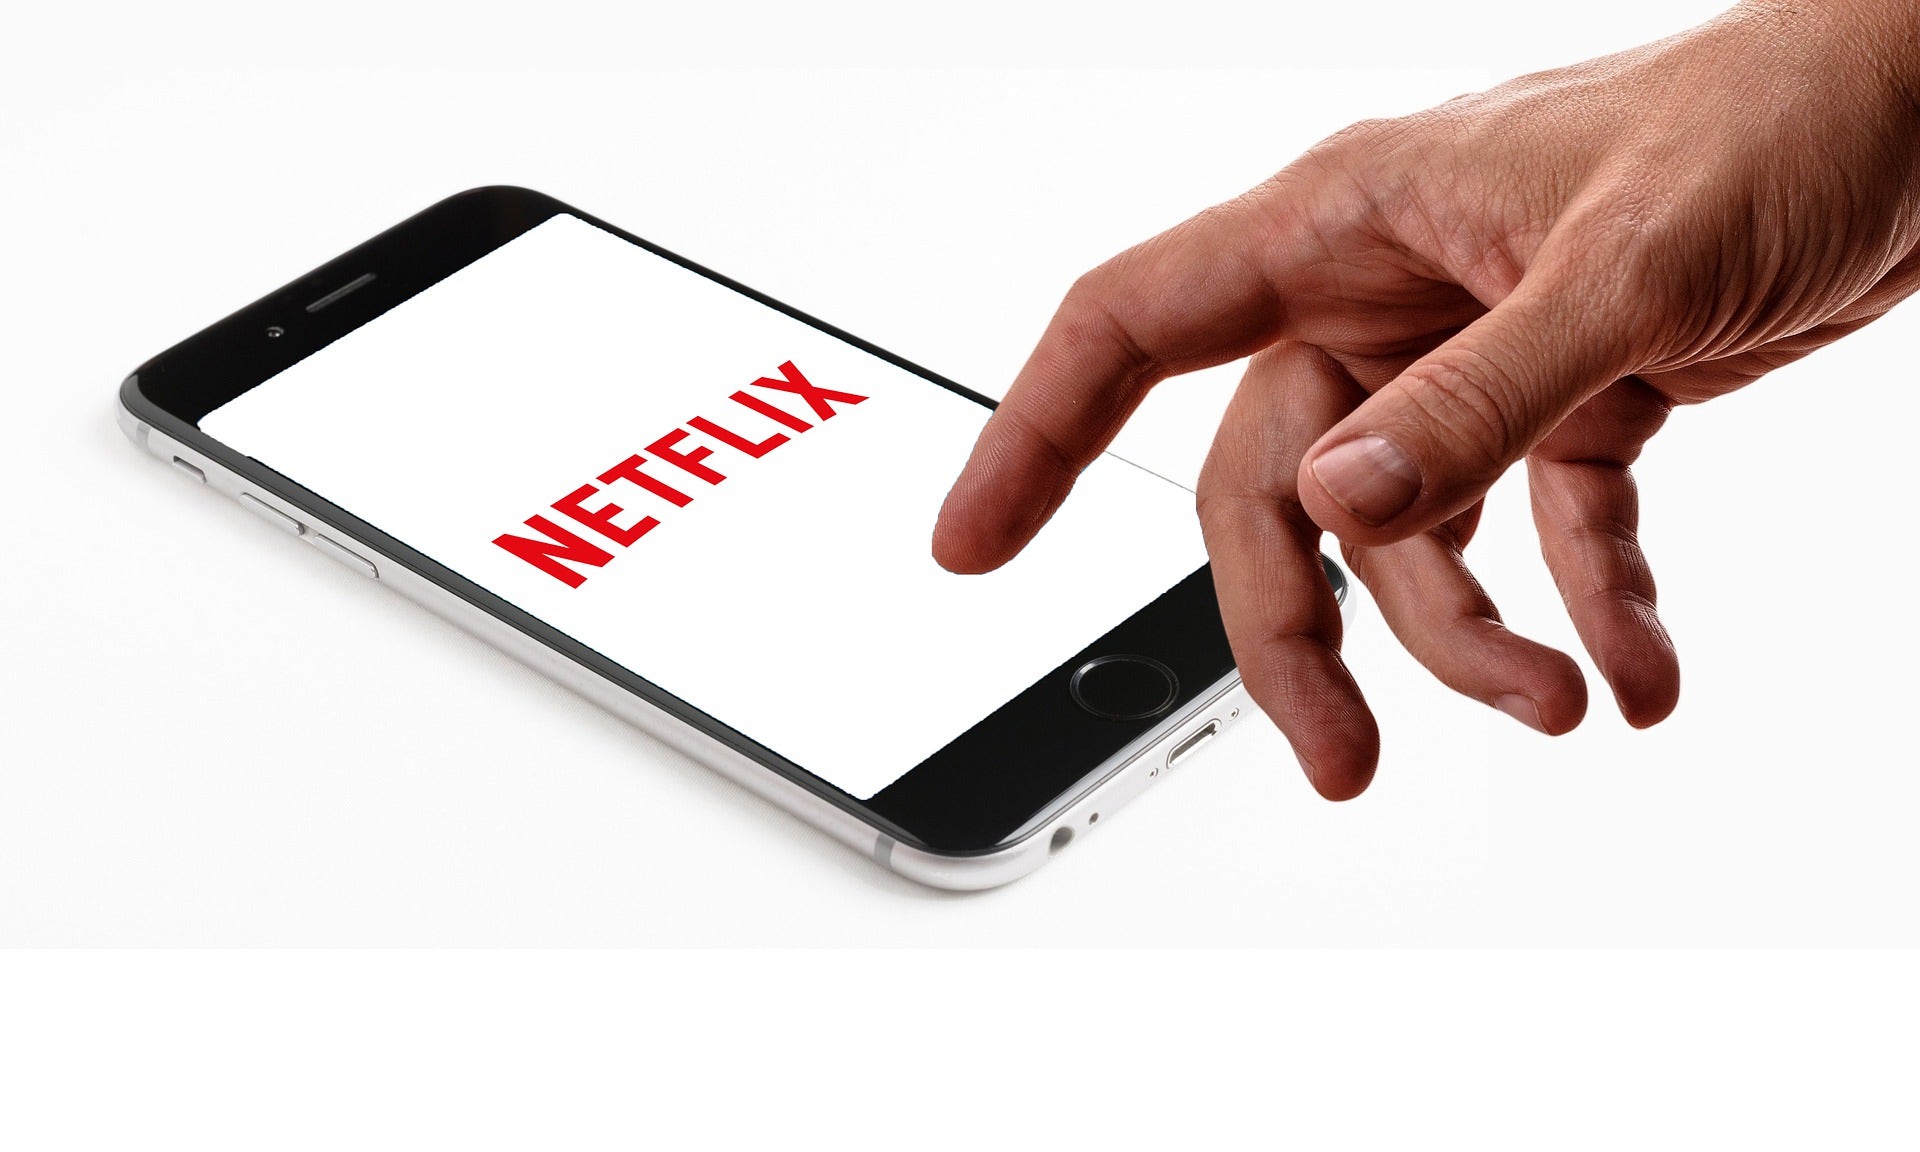 Netflix Goes Slower On Cloud Computing, Other Costs To Counter Subscriber Slowdown